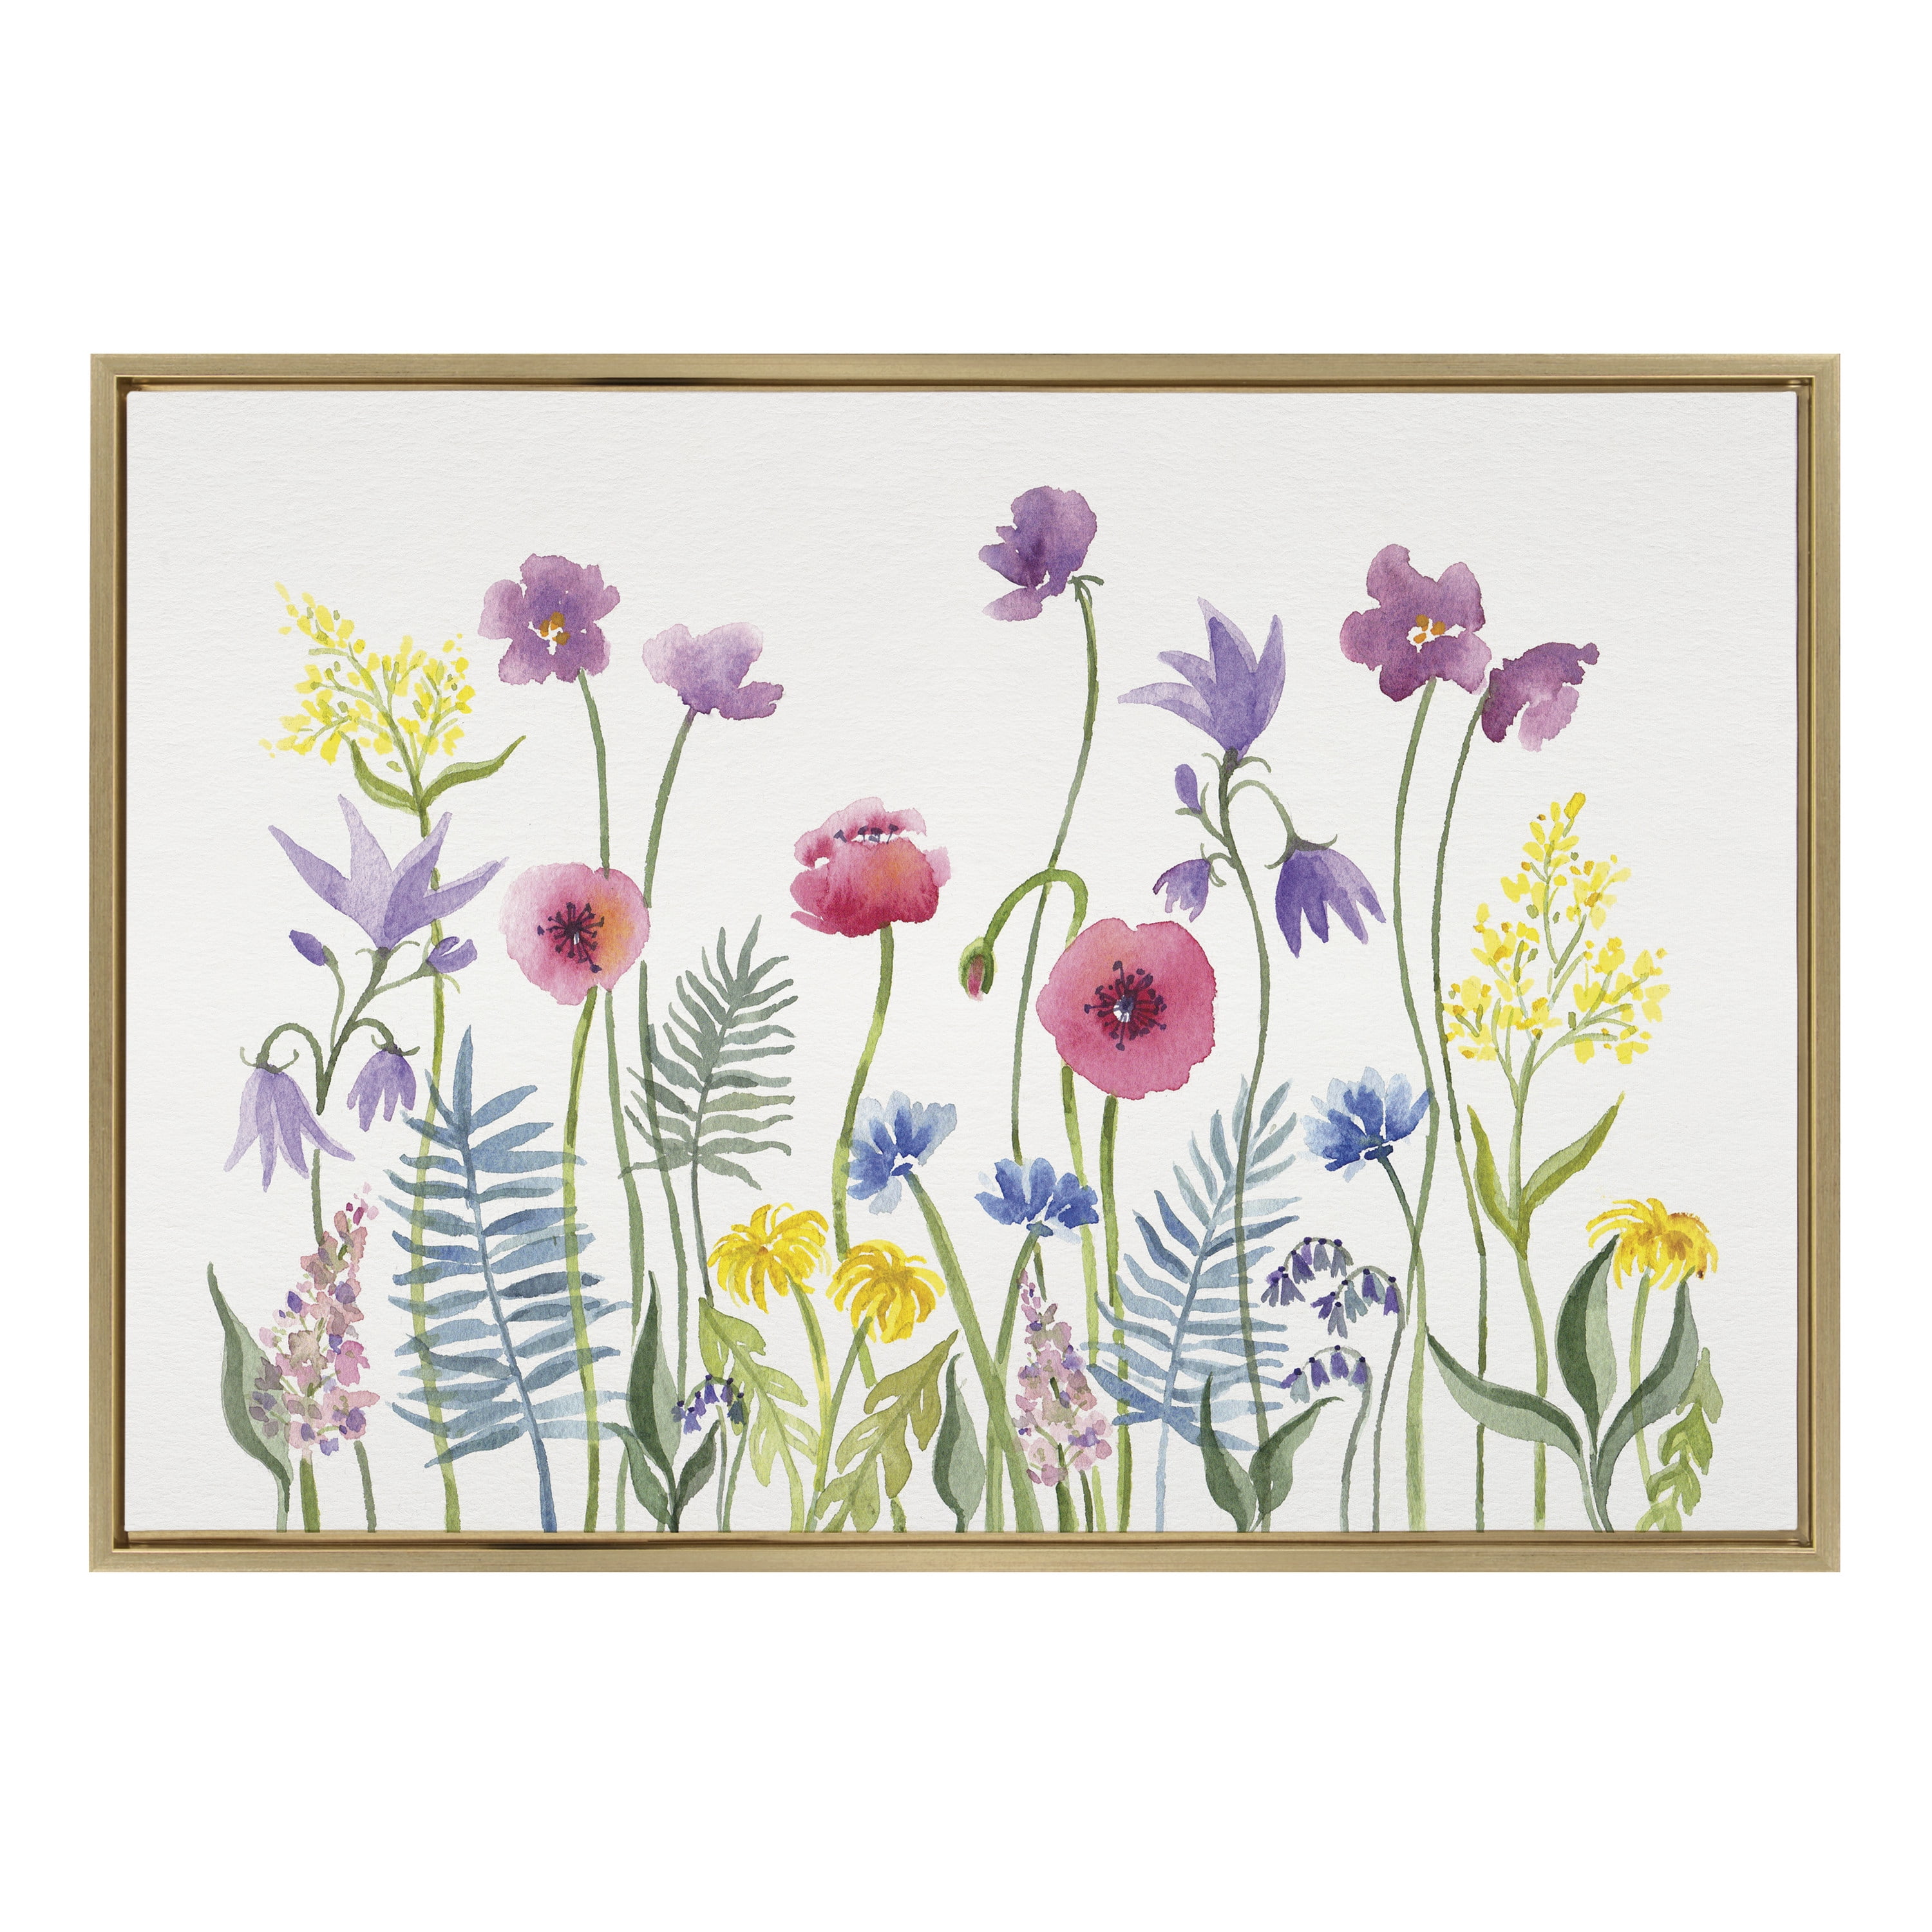 Kate and Laurel Sylvie Wildflowers Framed Canvas Wall Art by Patricia Shaw  23x33 Gold Flower Field Art for Wall